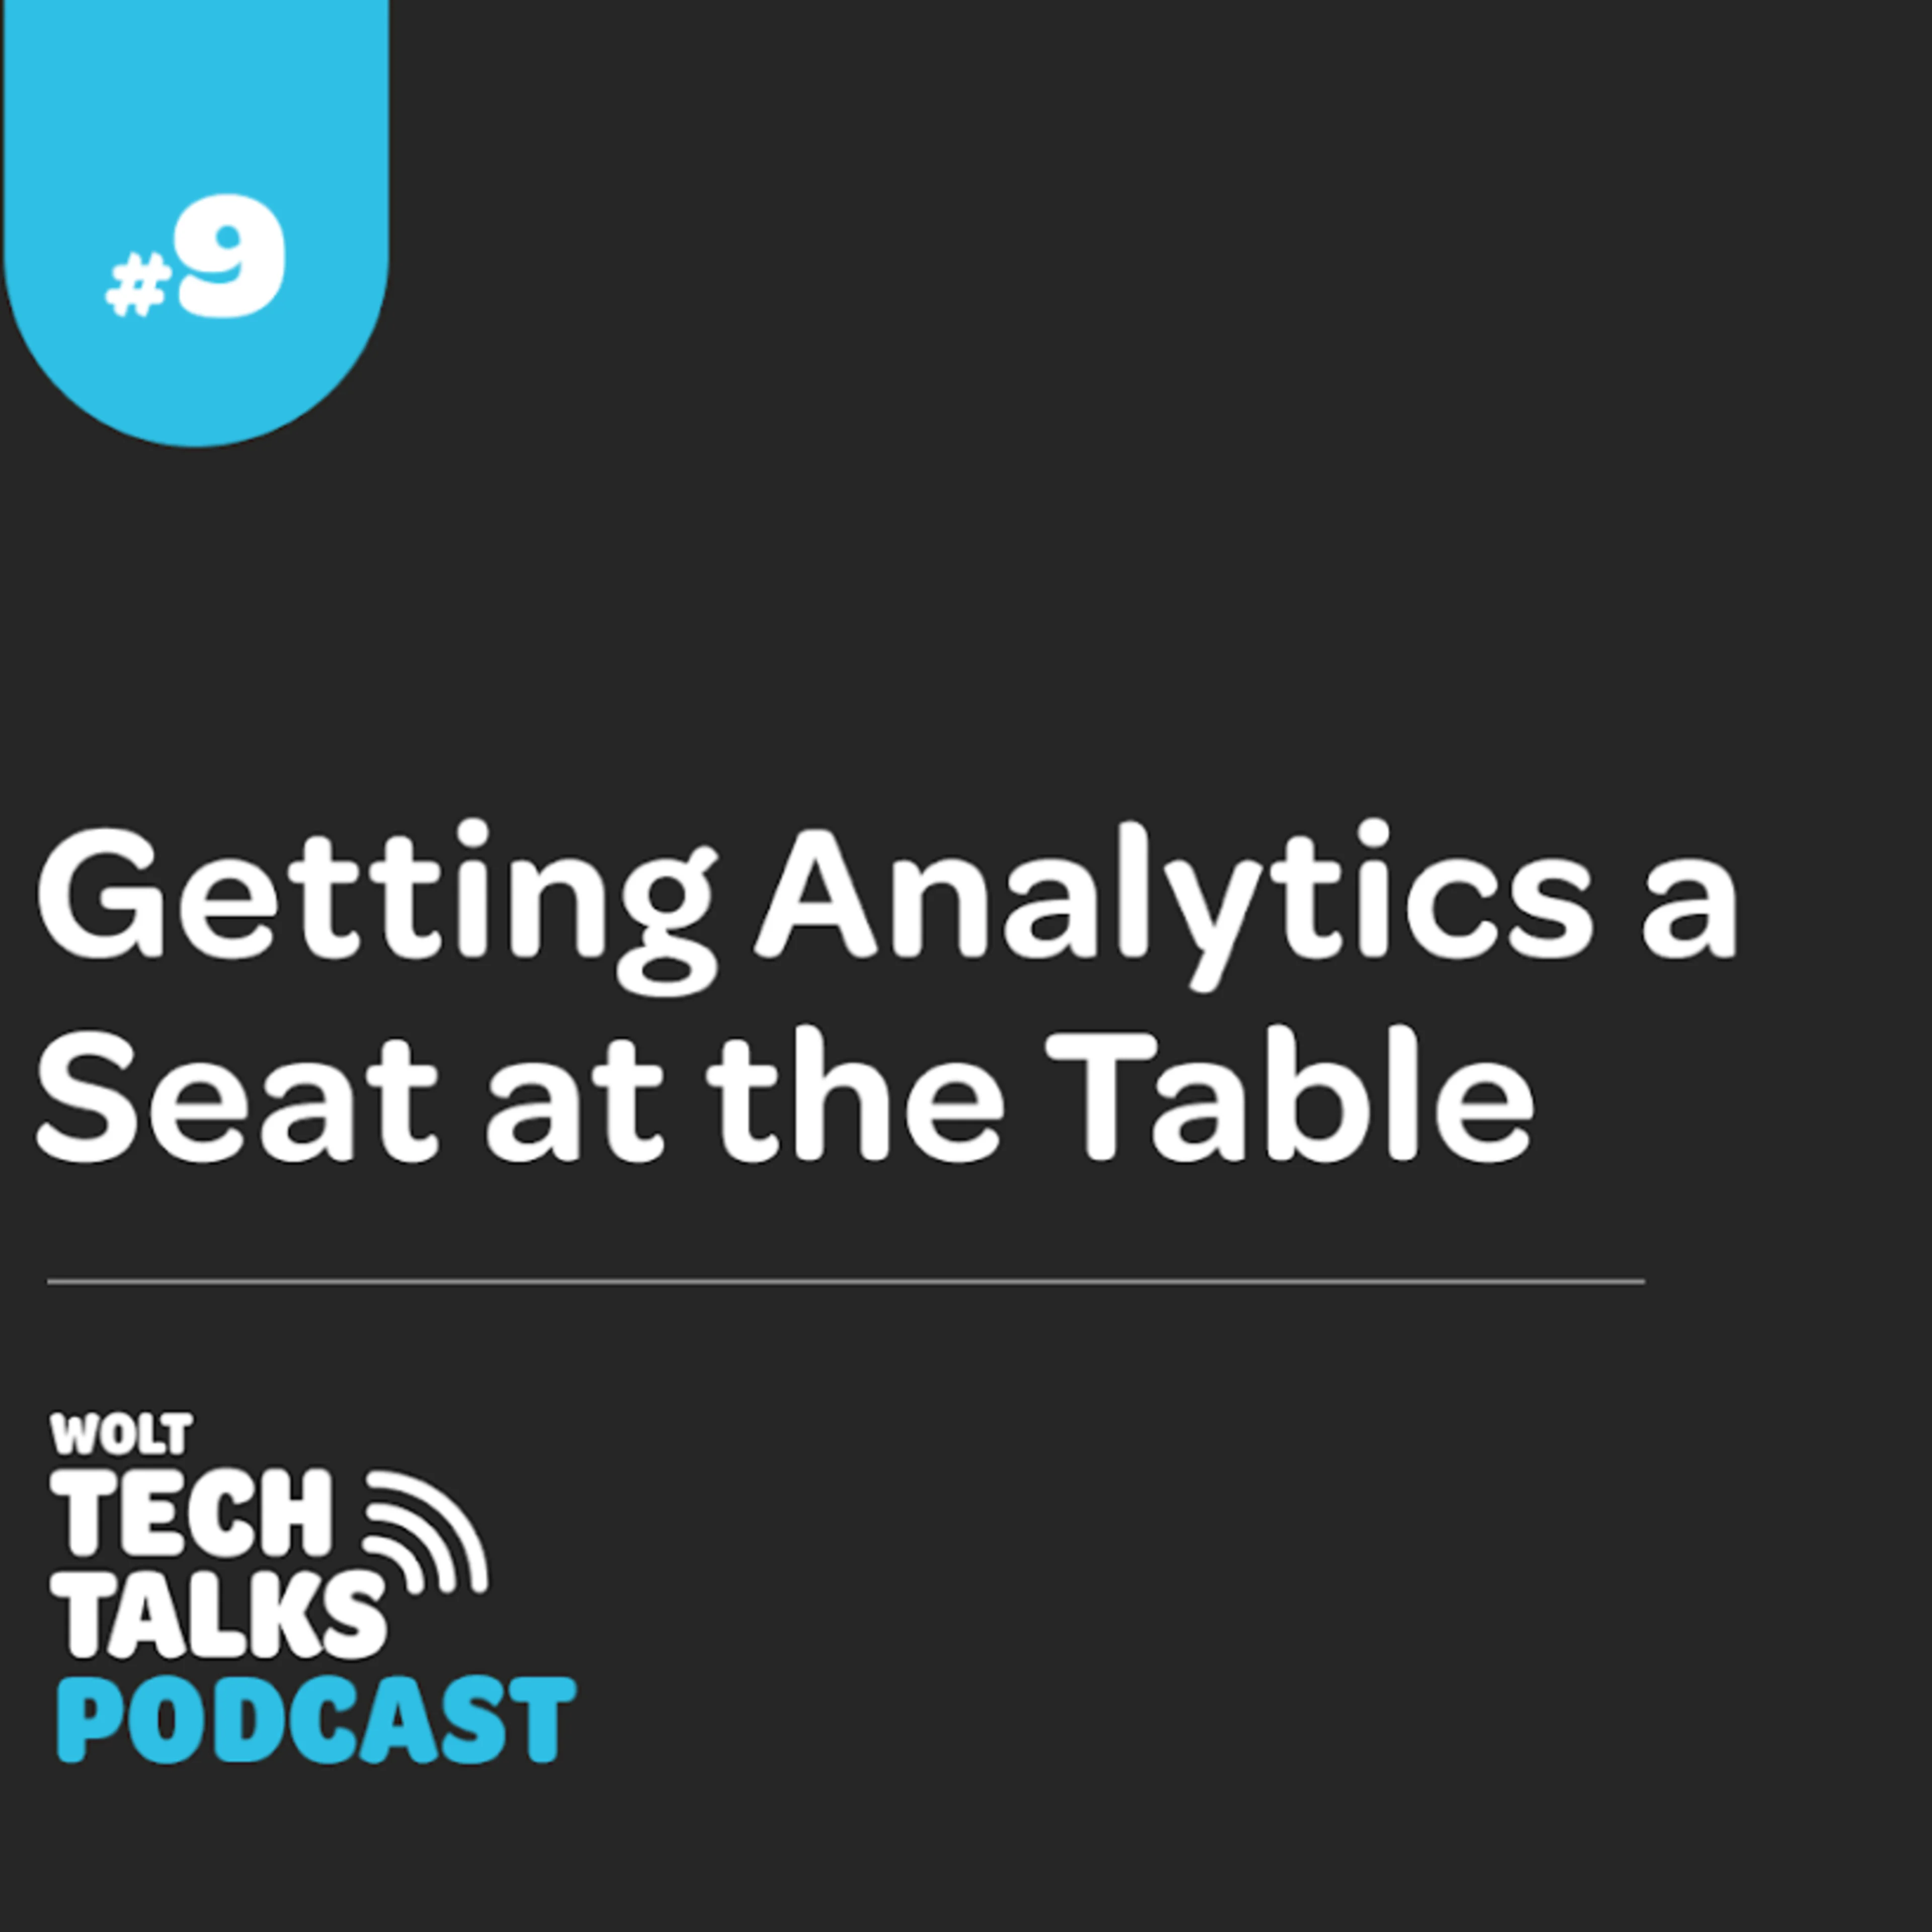 Wolt Tech Talks podcast #9: Getting Analytics a Seat at the Table